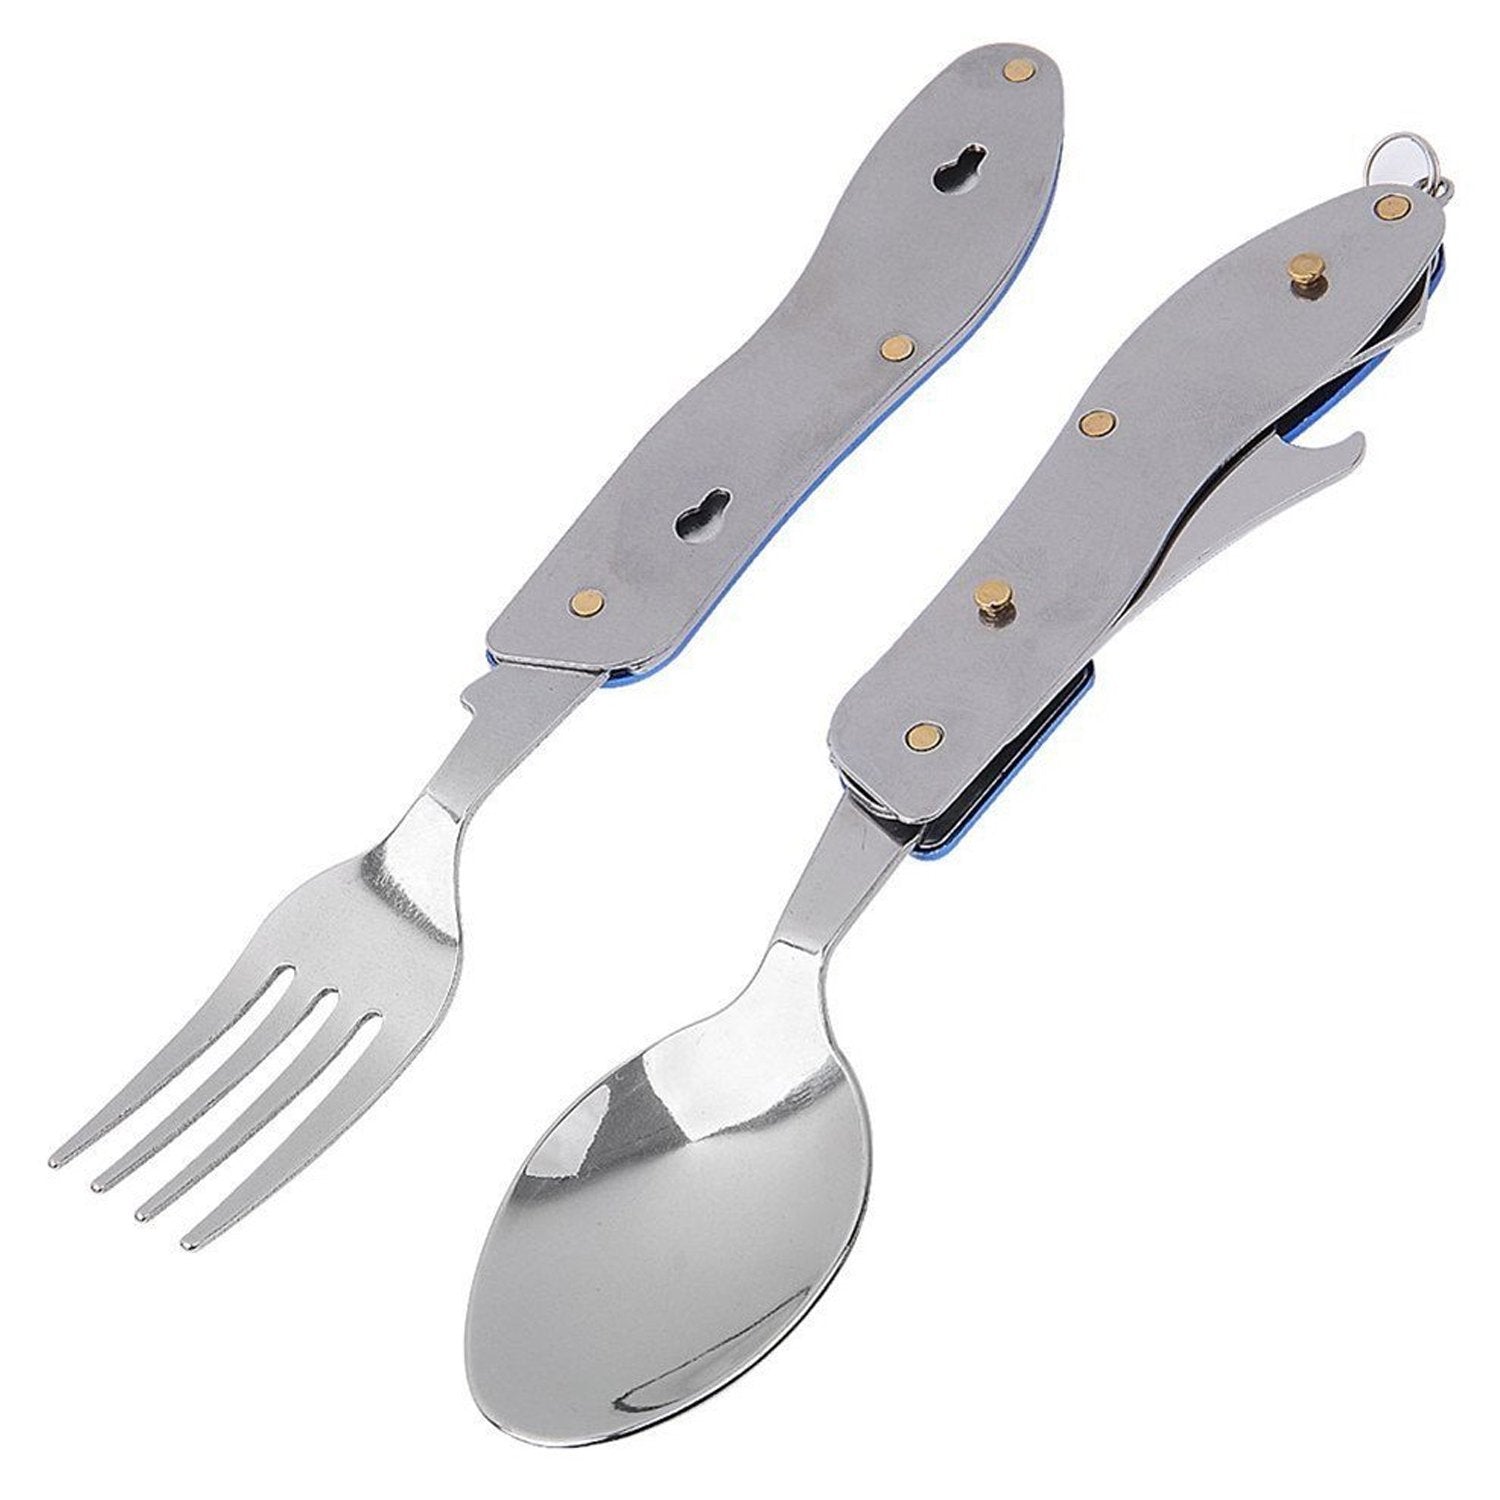 1779 4-in-1 Stainless Steel Travel/Camping Folding Multi Swiss Cutlery Set